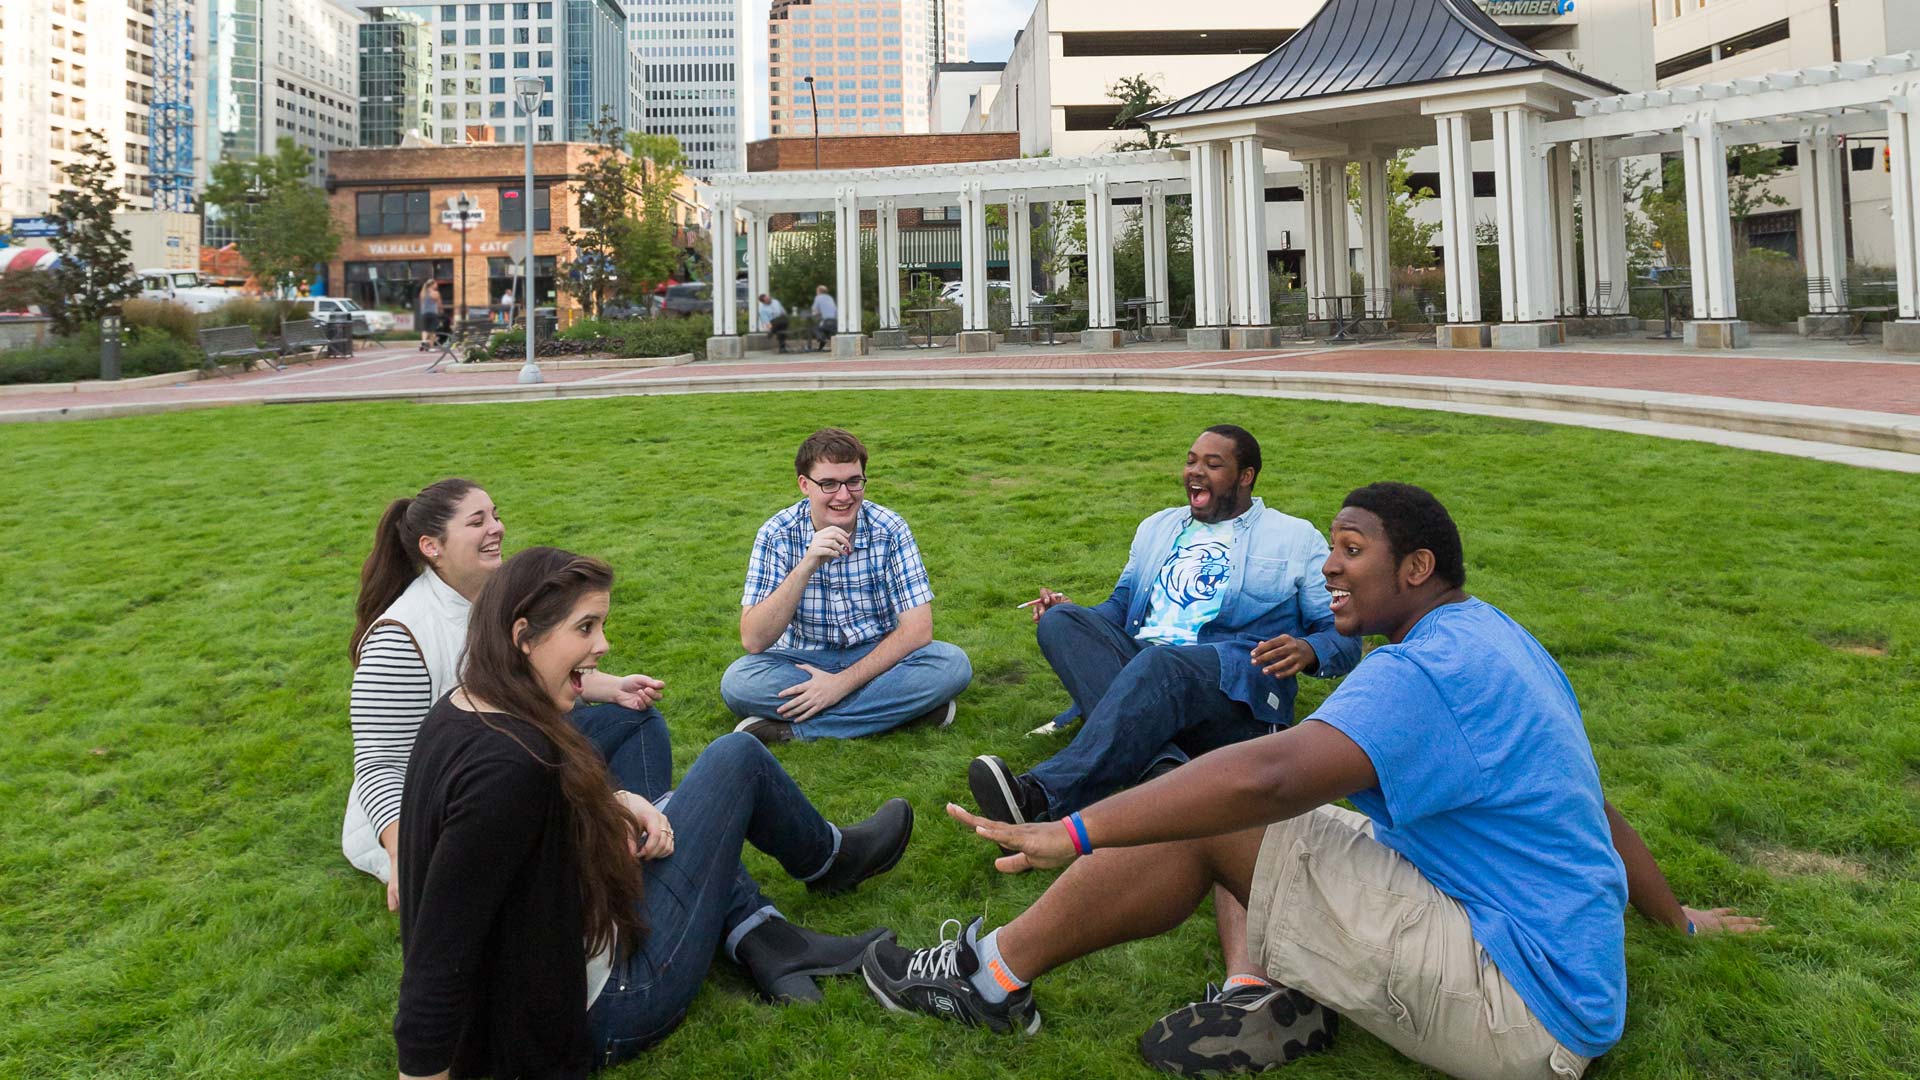 JWU Charlotte is located in a financial and cultural hub.